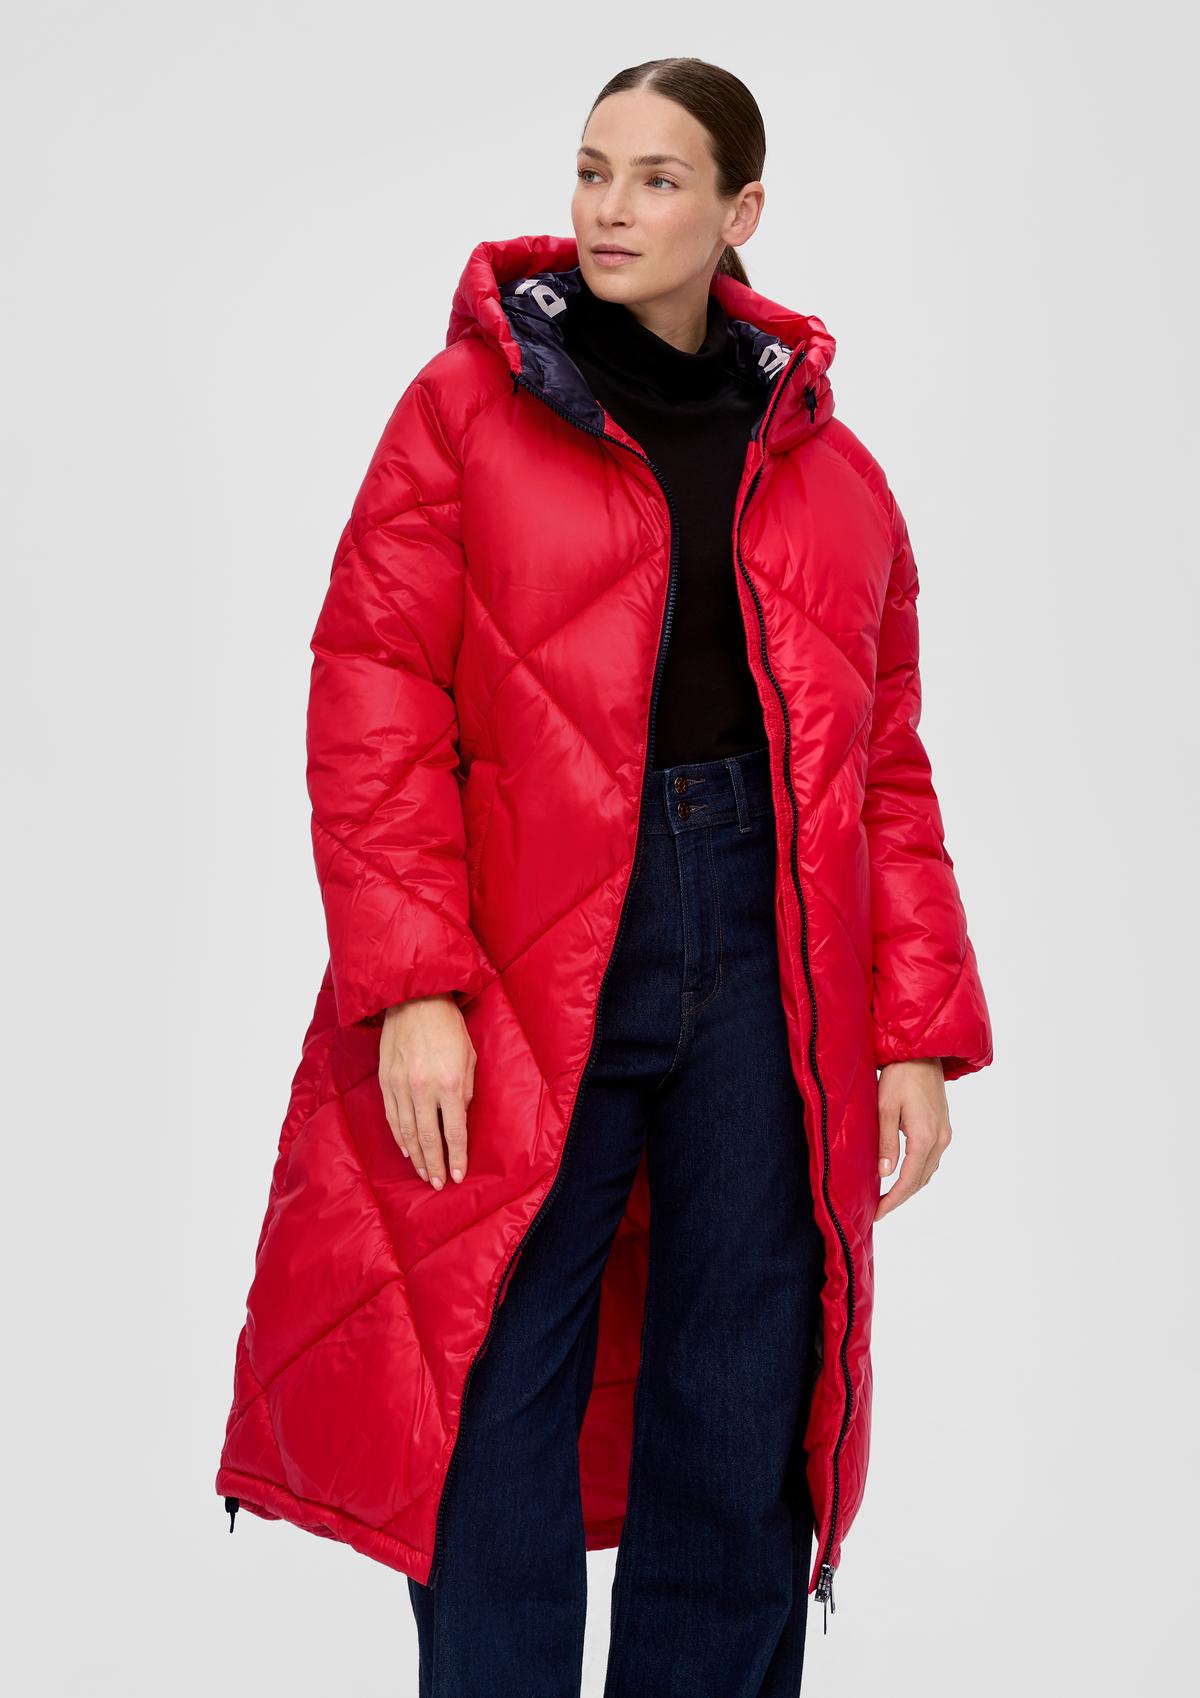 Coat with a hood and quilted pattern